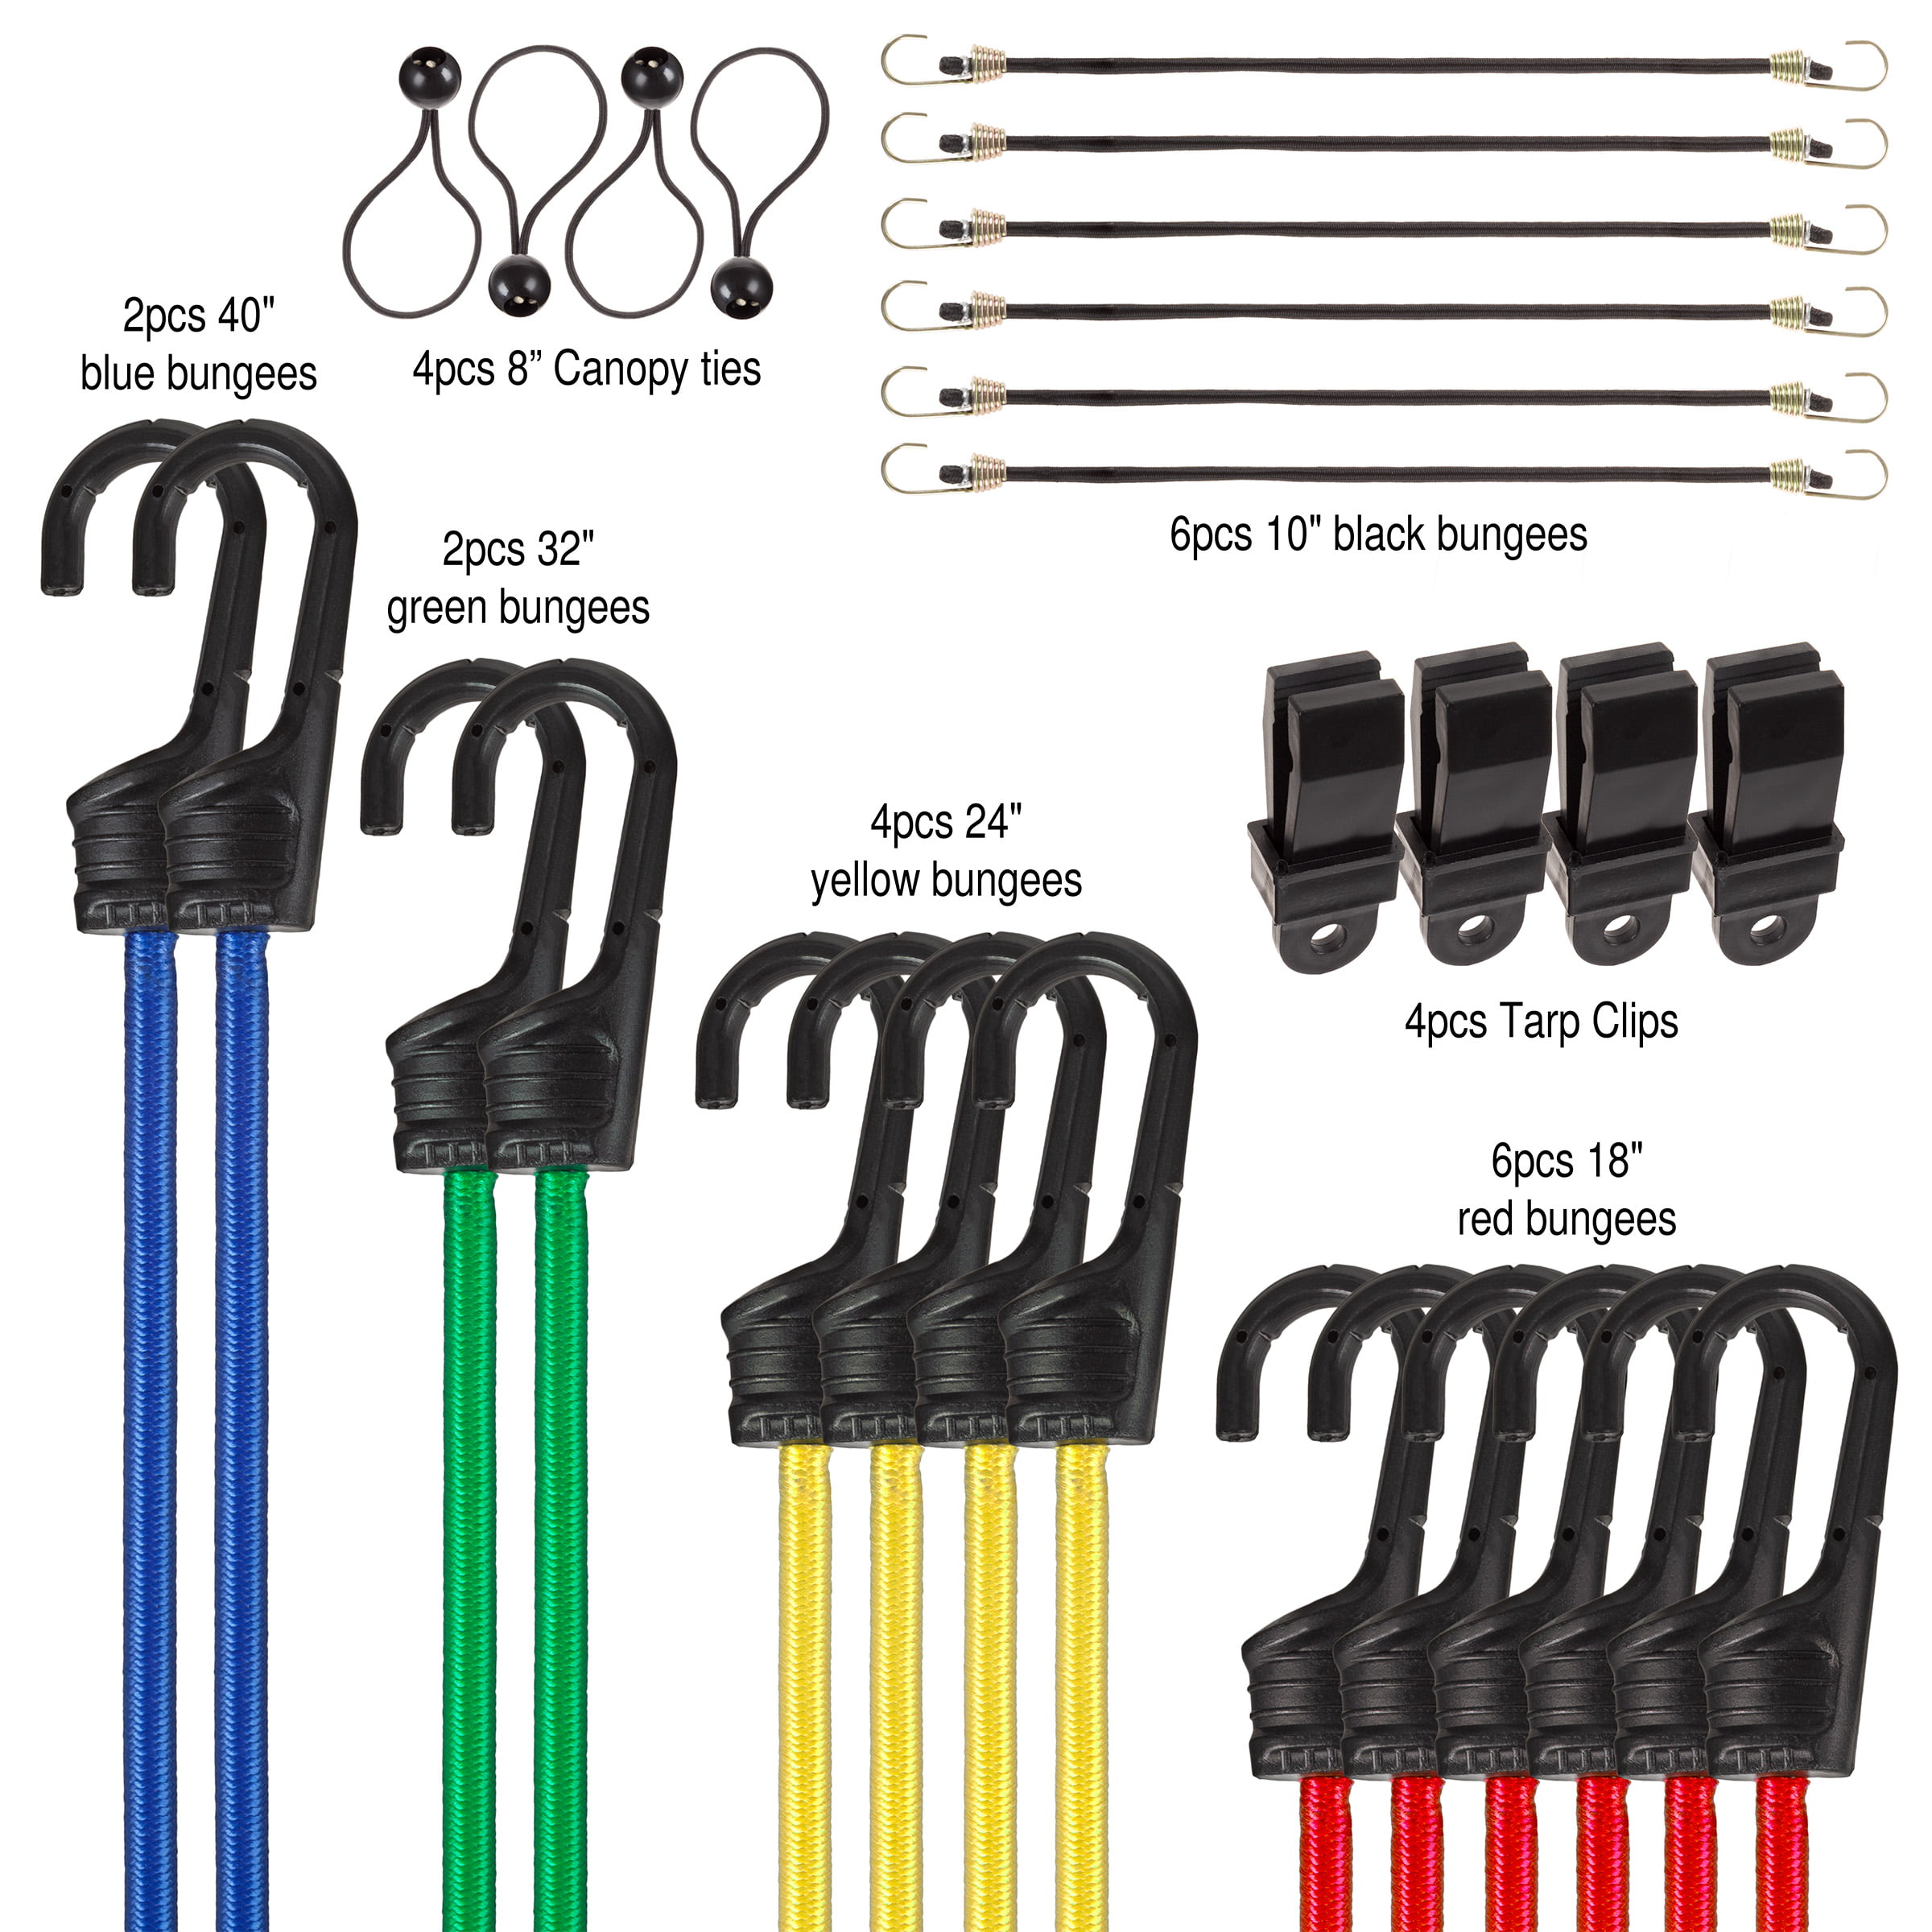 POLARBEAR 28Pcs Bungee Cords with Hooks Assorted Sizes - 10 18 24 31  40 Plastic Coated Steel Cords - with 4 Tarp Clips/4 Ball Cords/Storage Bag  - Use for Transport, Moving, Fixed